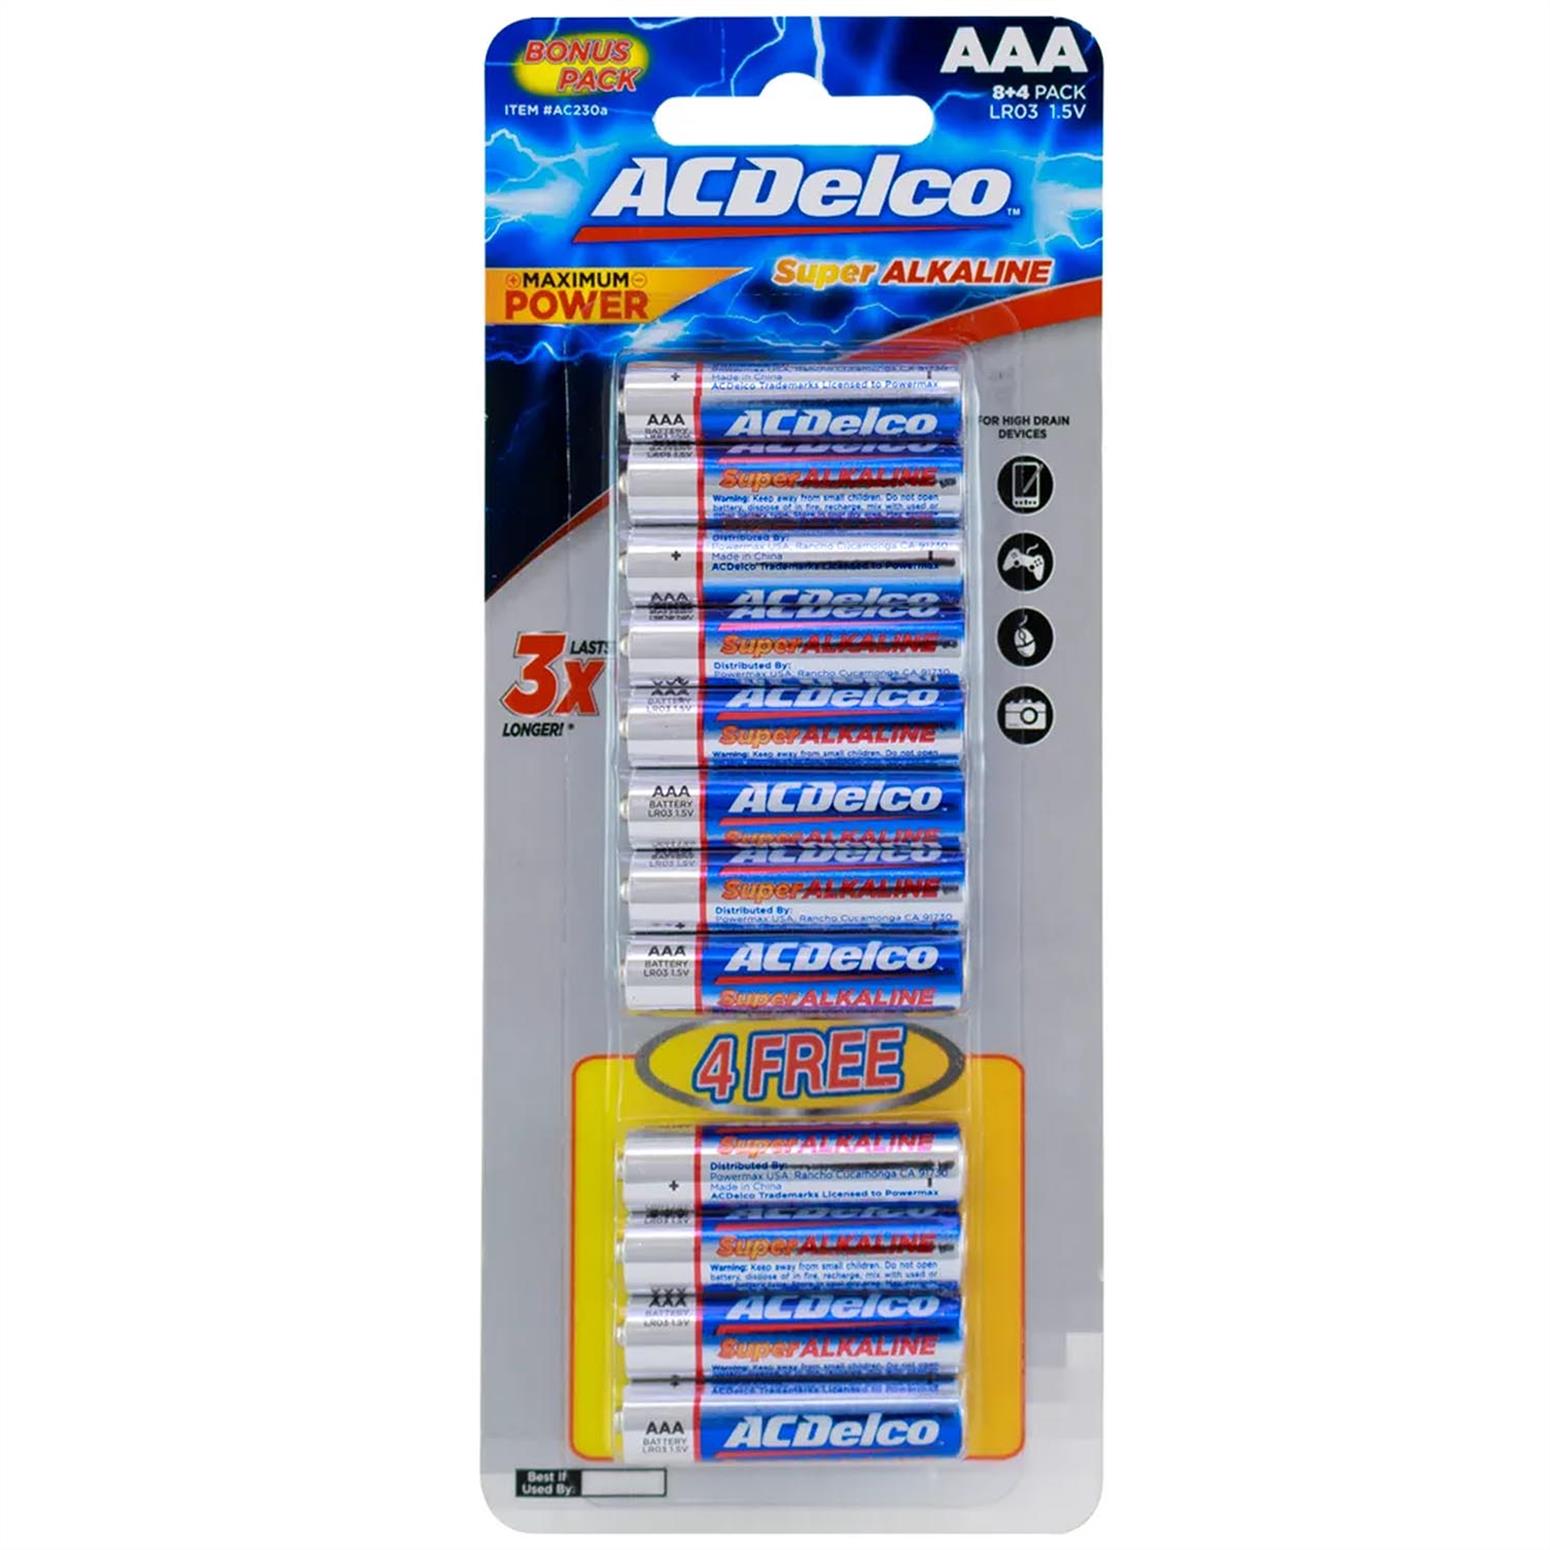 ACDelco Alkaline Battery AAA 1.5V Pack of 8+4 pcs for free